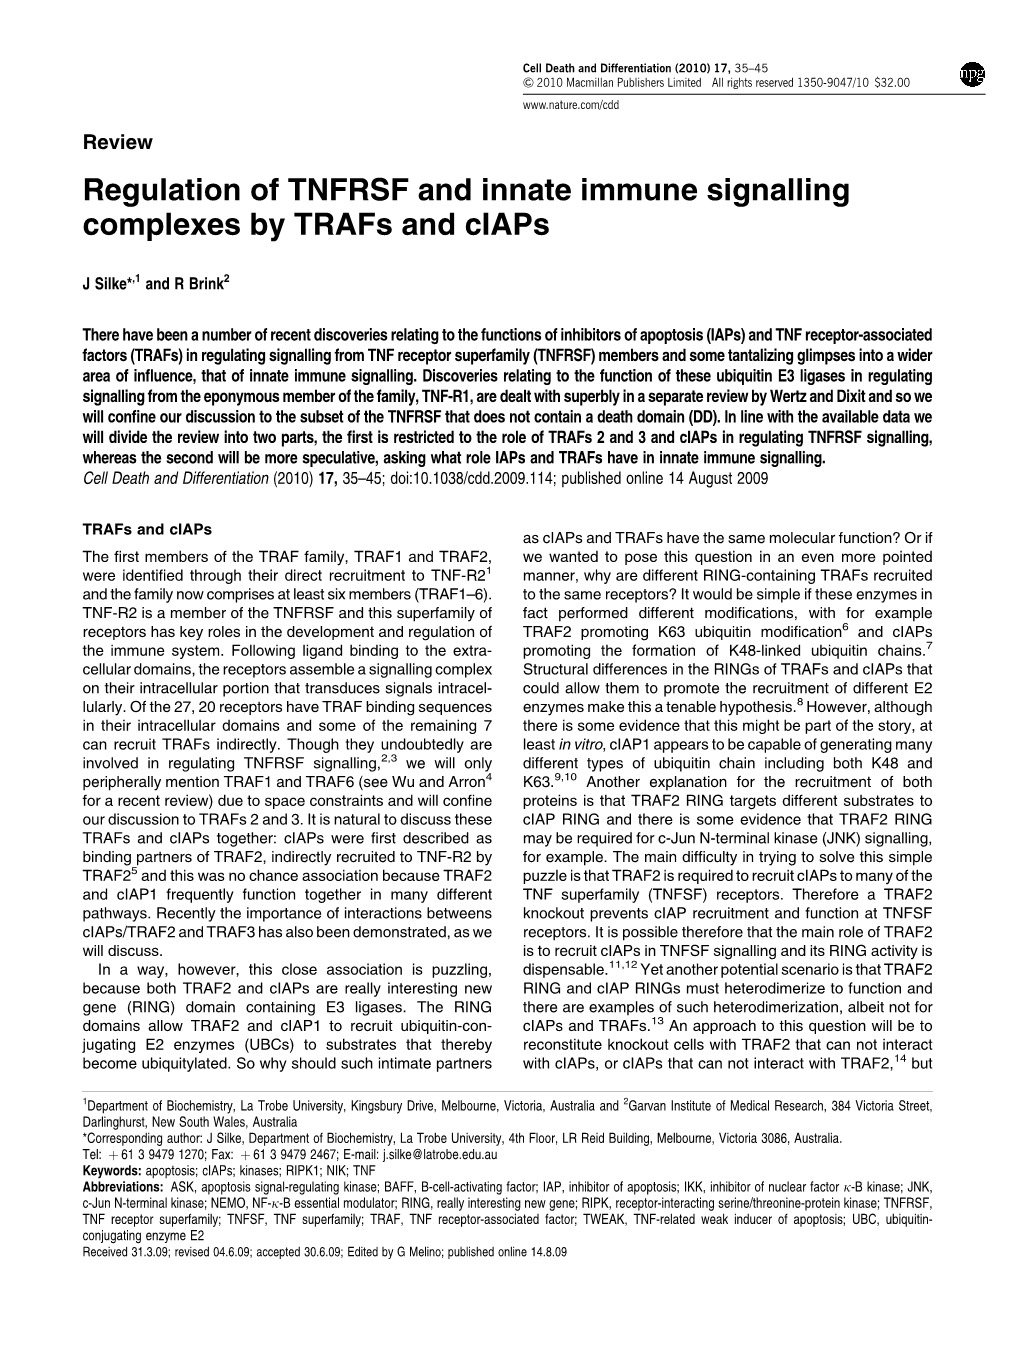 Regulation of TNFRSF and Innate Immune Signalling Complexes by Trafs and Ciaps